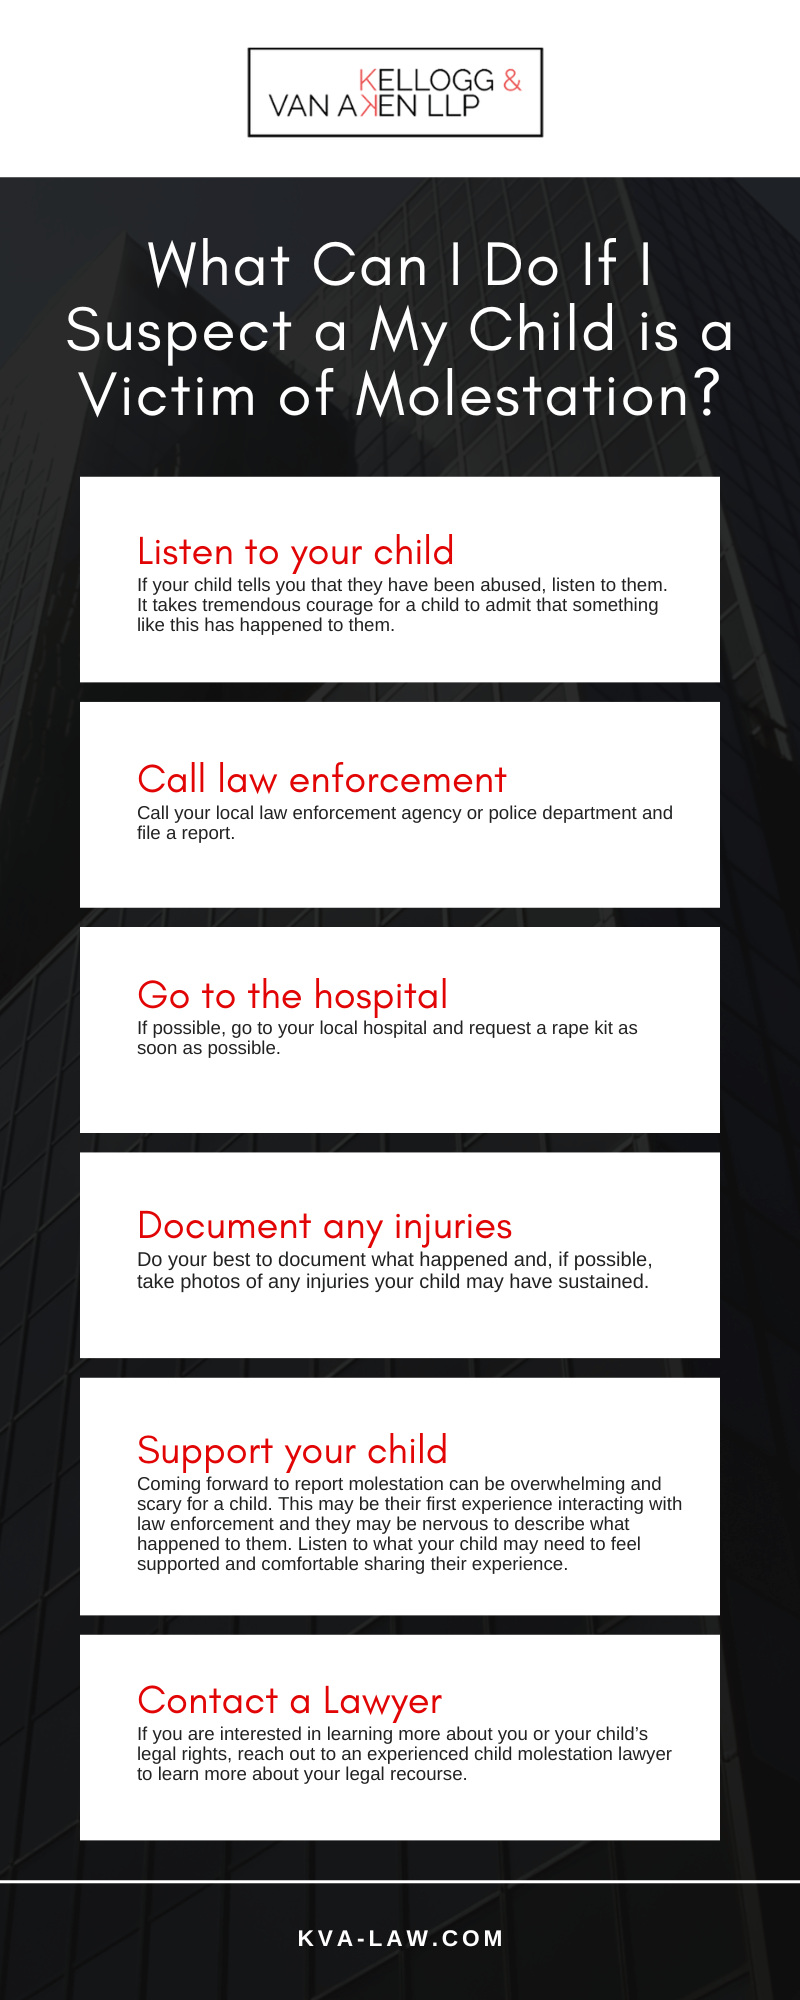 What Can I Do If I Suspect a My Child is a Victim of Molestation Infographic